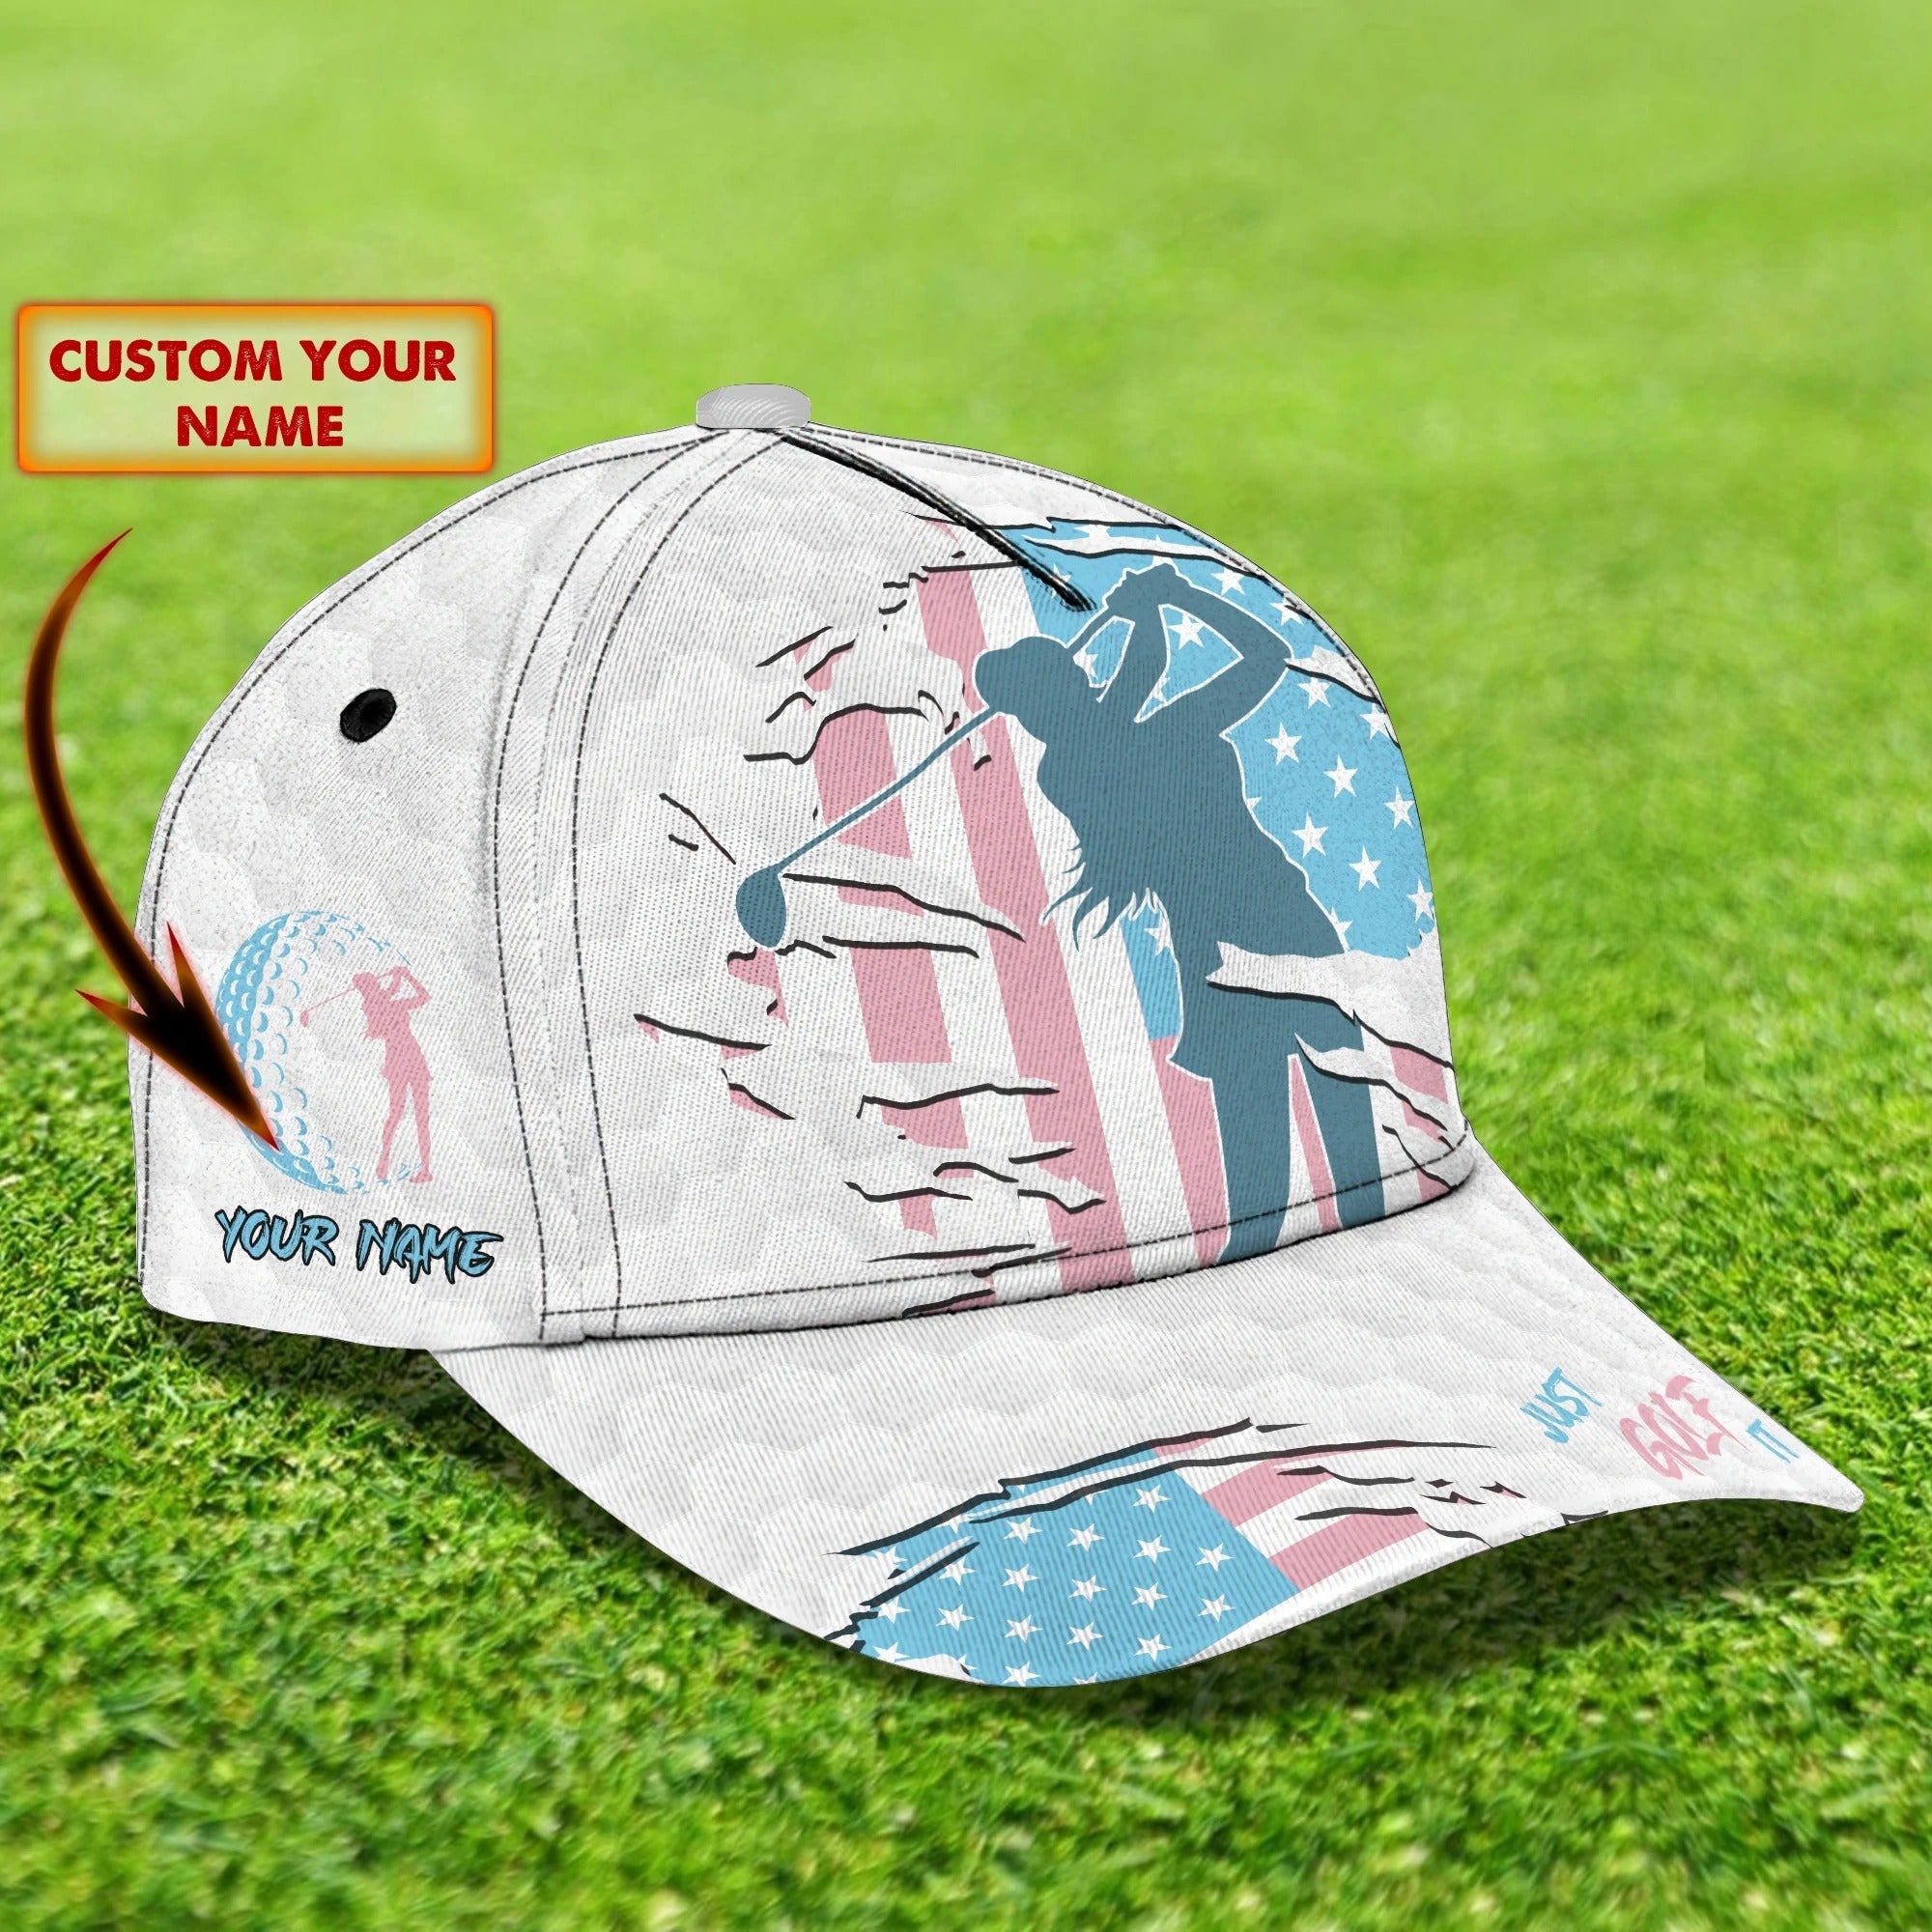 Personalized 3D Full Printed Cap For Girl Love Golf And Dog/ 3D Golf Cap Hat For Her